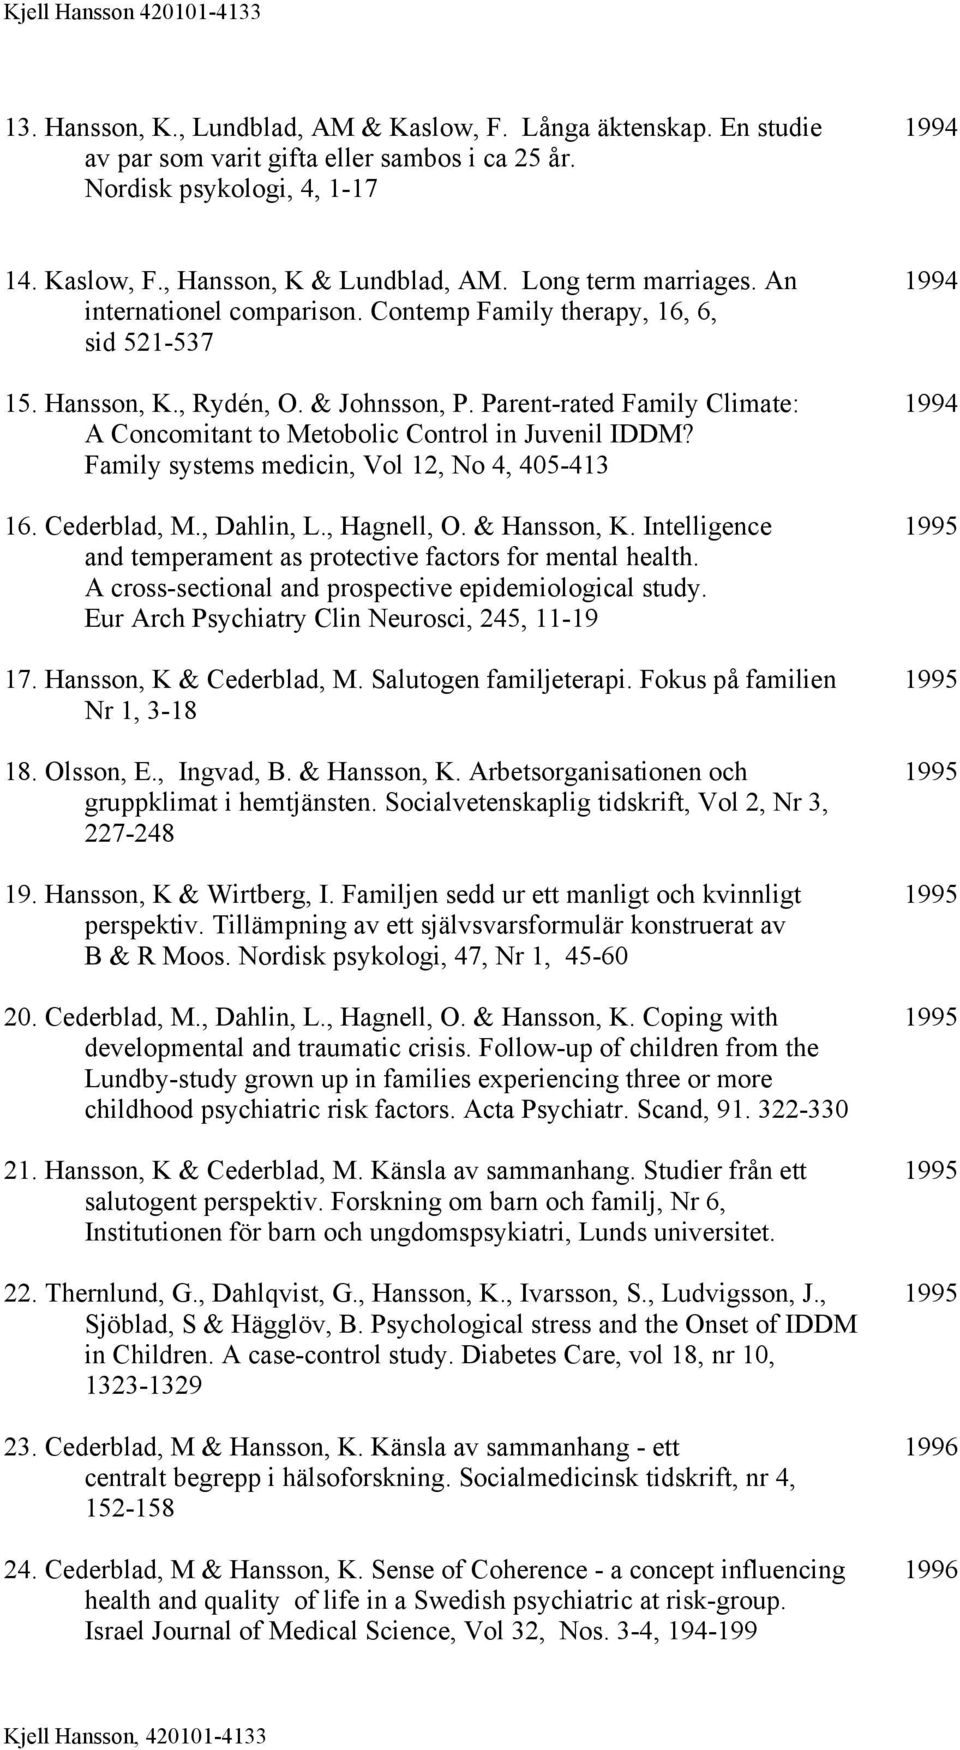 Parent-rated Family Climate: 1994 A Concomitant to Metobolic Control in Juvenil IDDM? Family systems medicin, Vol 12, No 4, 405-413 16. Cederblad, M., Dahlin, L., Hagnell, O. & Hansson, K.